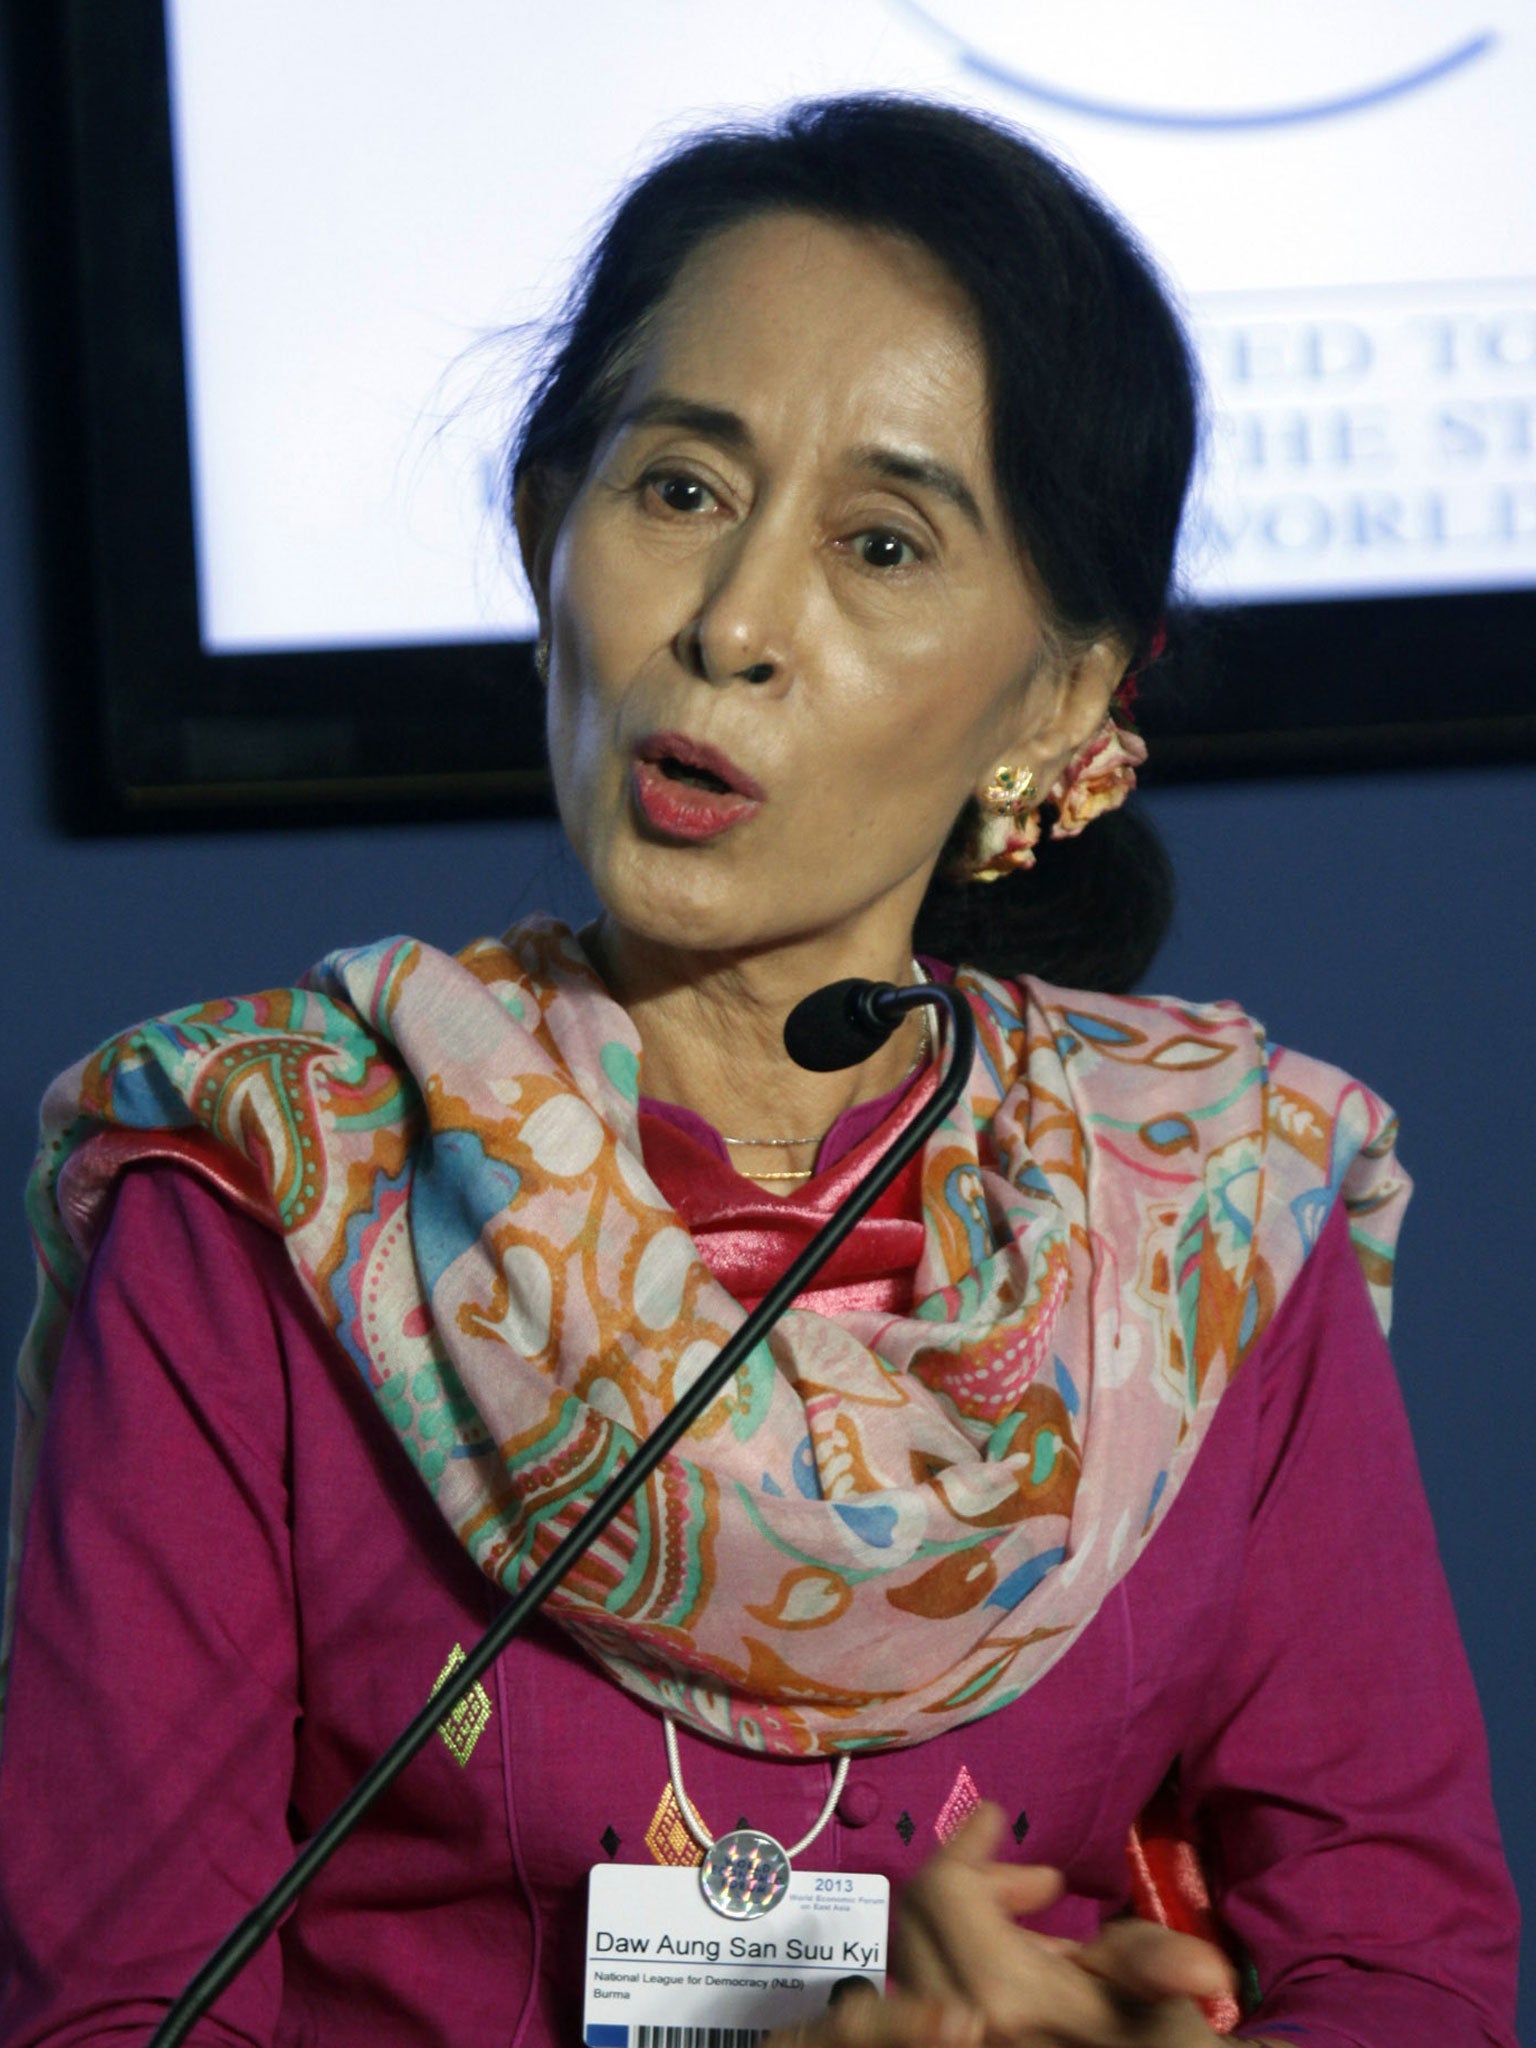 Myanmar's pro-democracy leader Aung San Suu Kyi talks to reporters during a news conference at the World Economic Forum